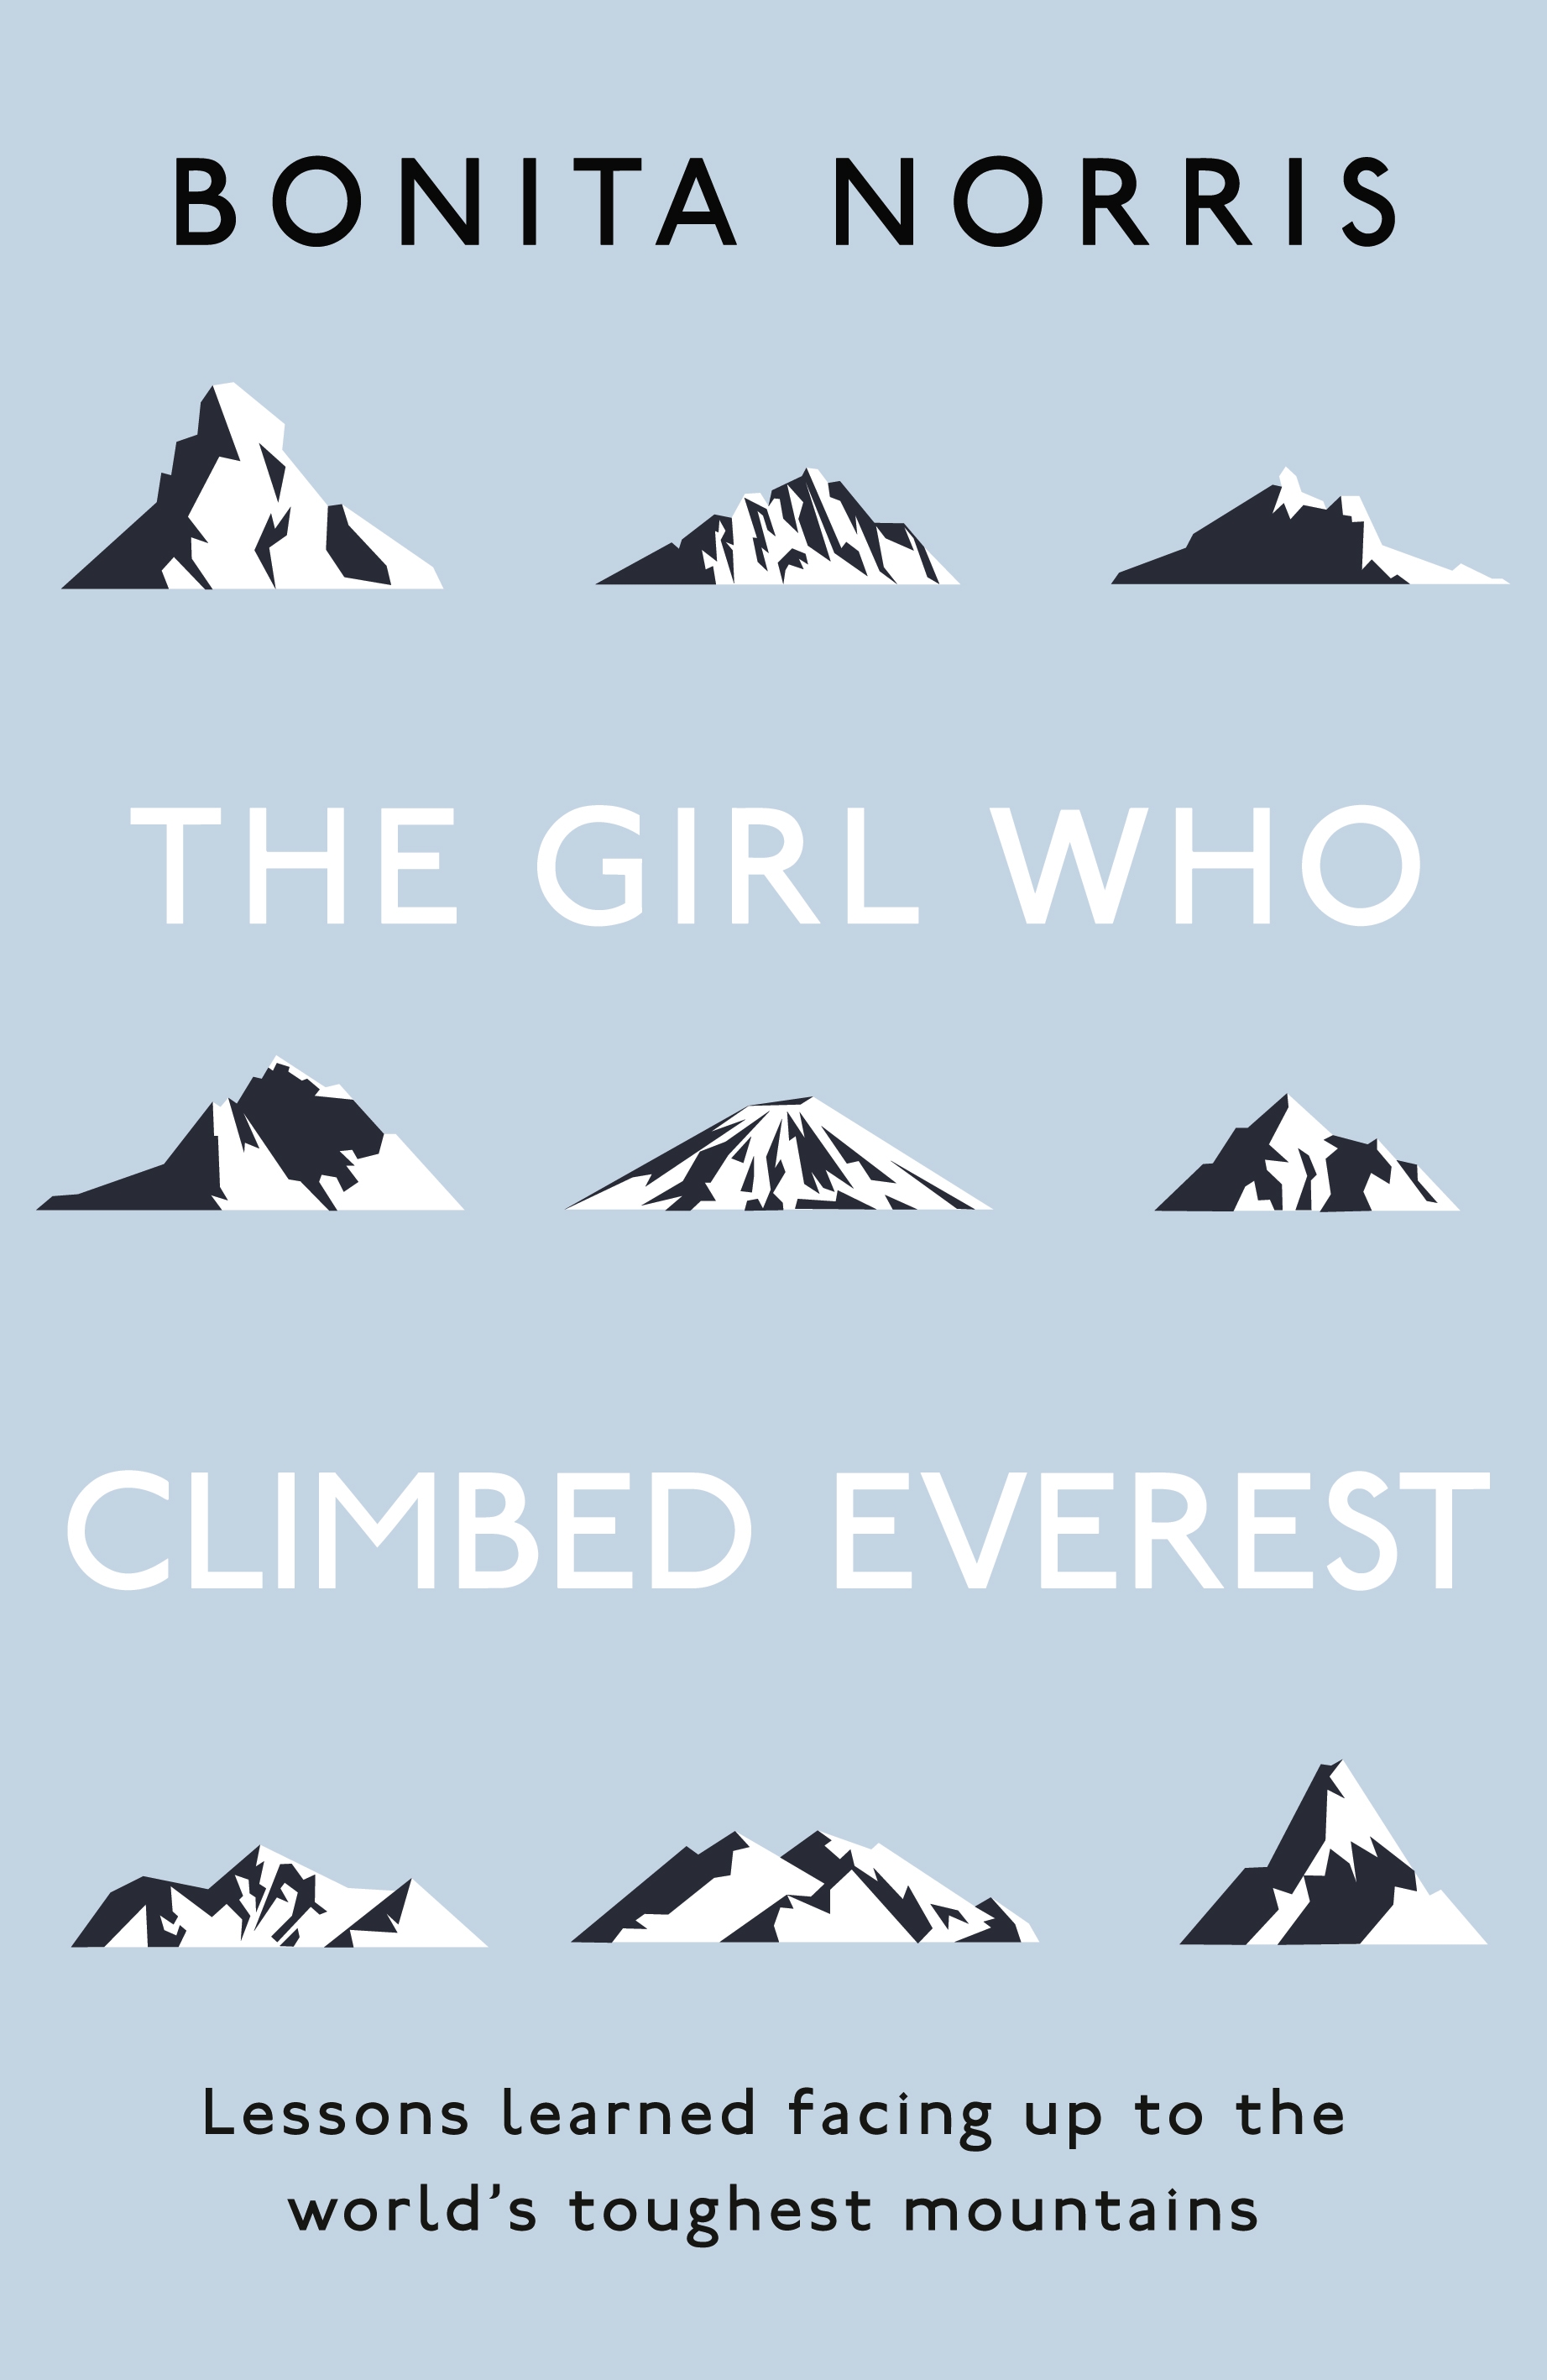 Have en picnic svamp fast The Girl Who Climbed Everest by Bonita Norris — The Boardman Tasker Prize  for Mountain Literature